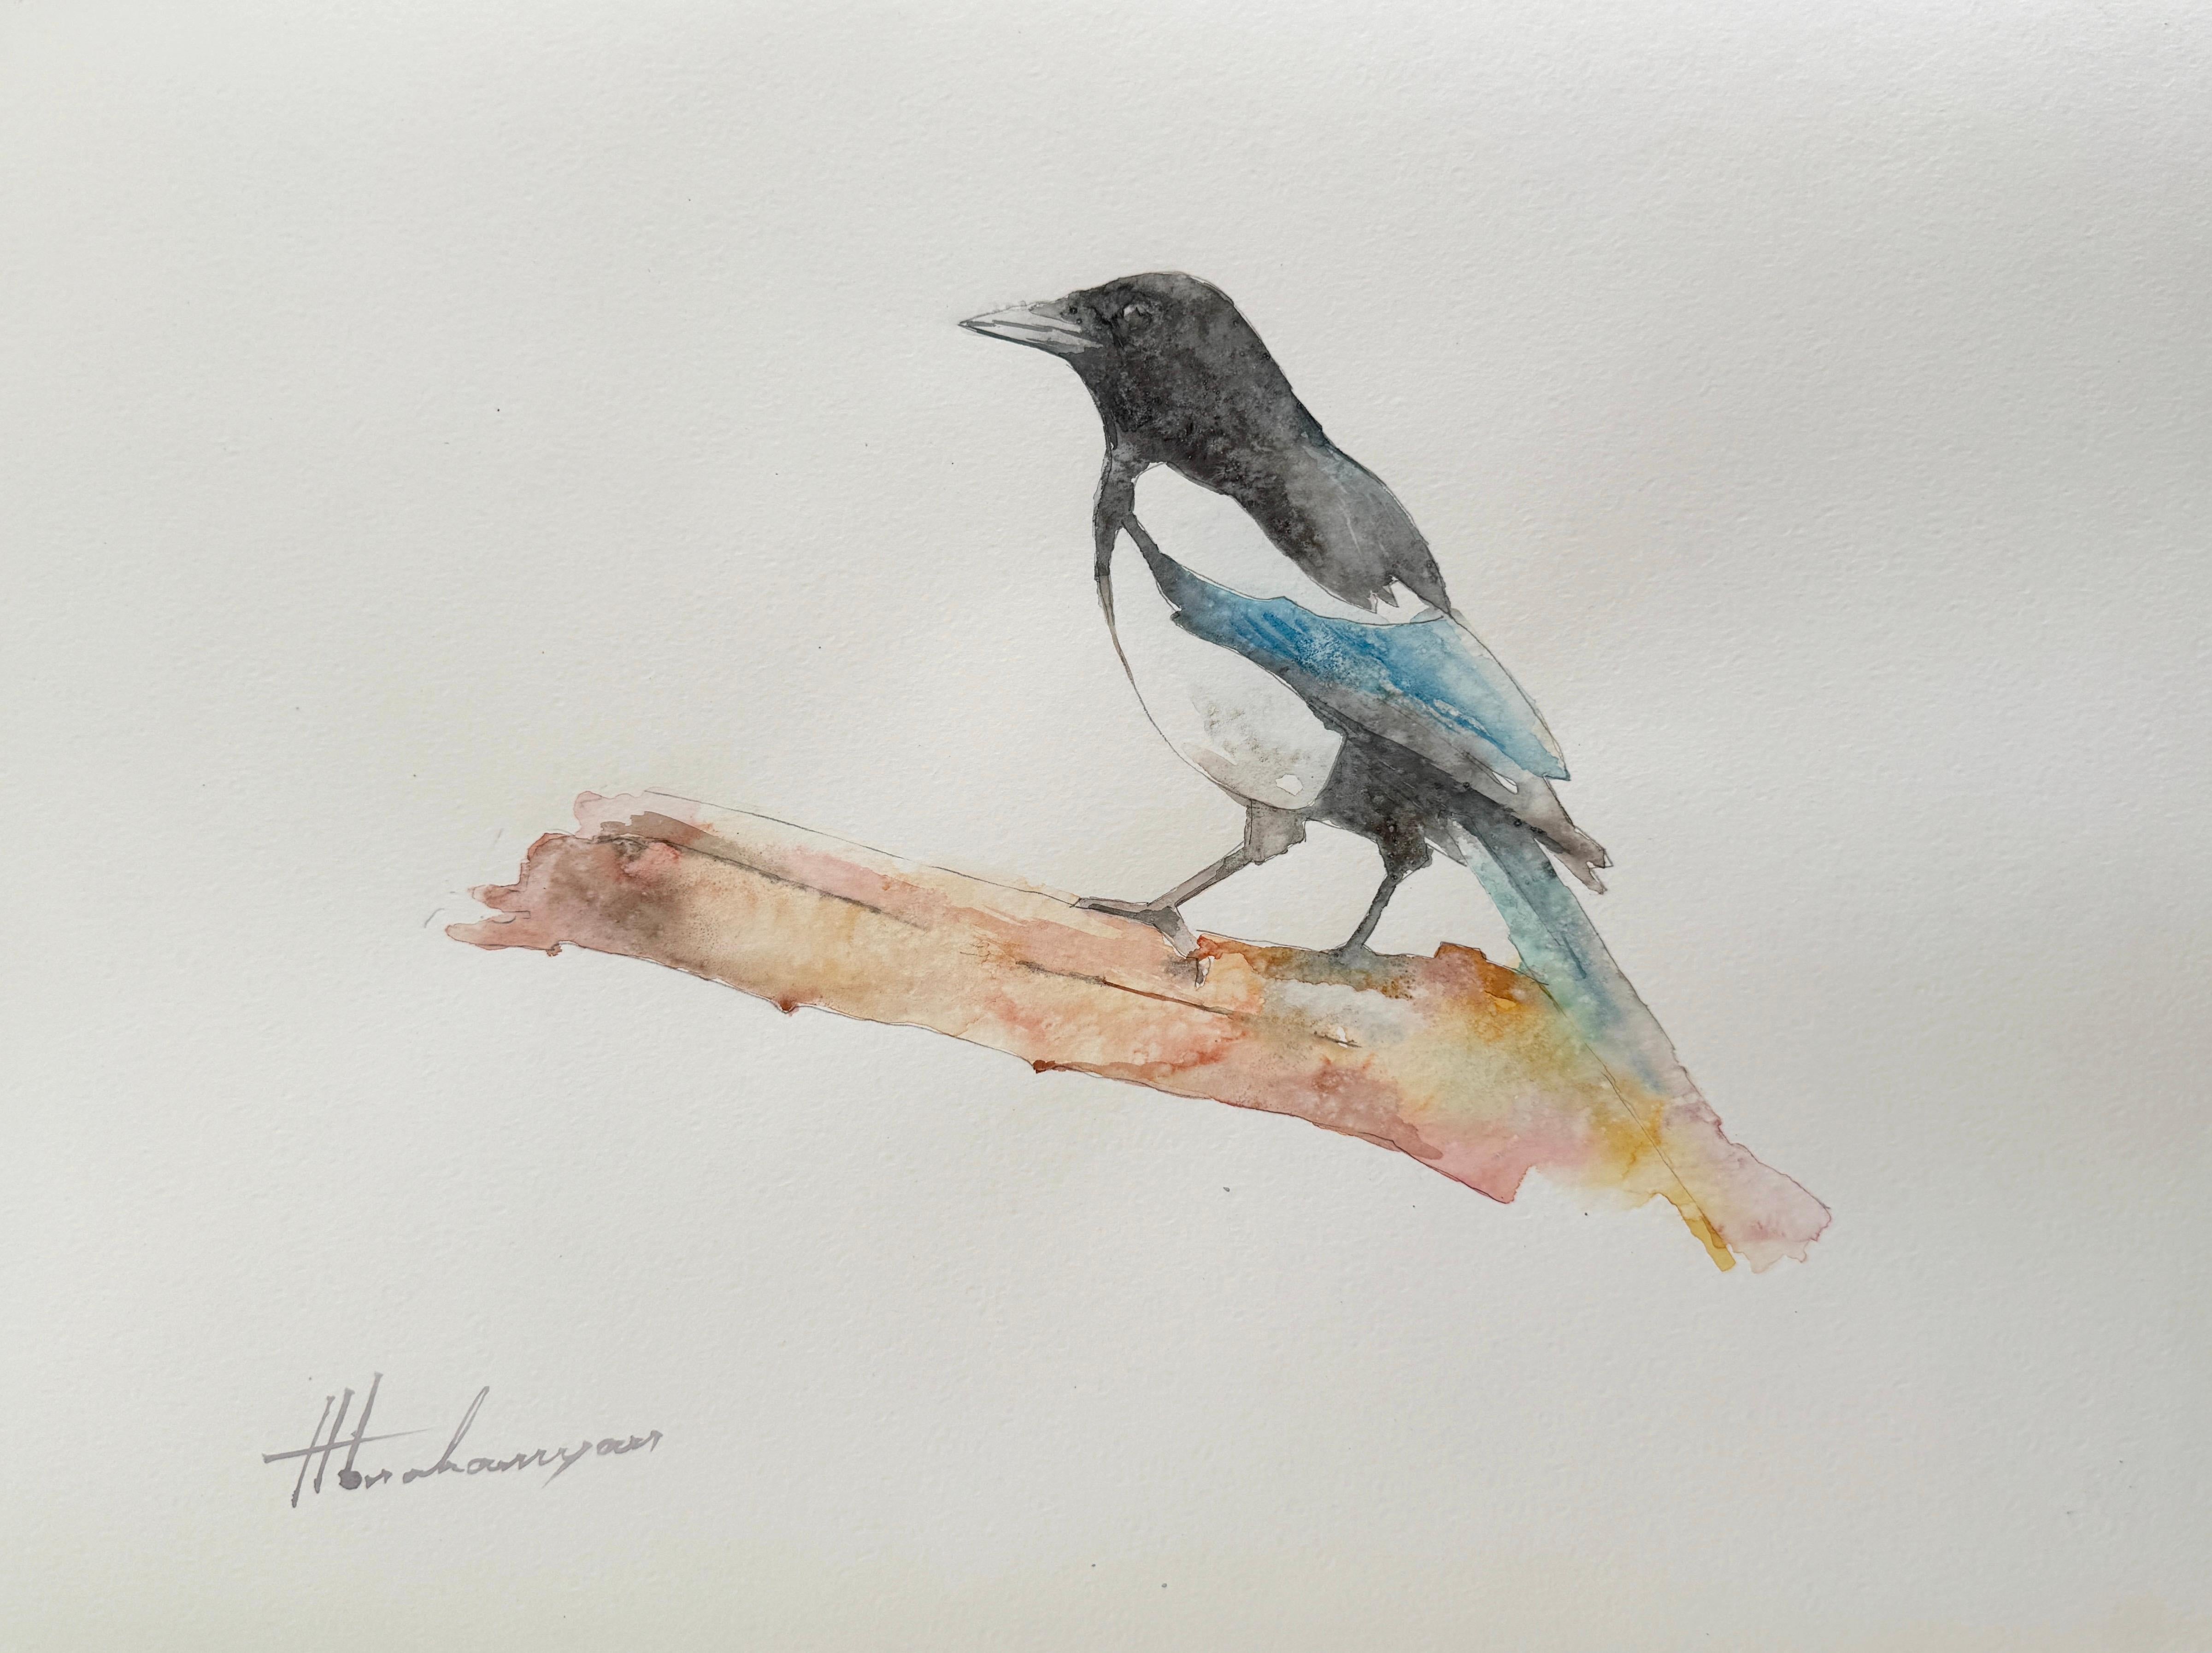 Magpie, Bird, Watercolor Handmade Painting, One of a Kind